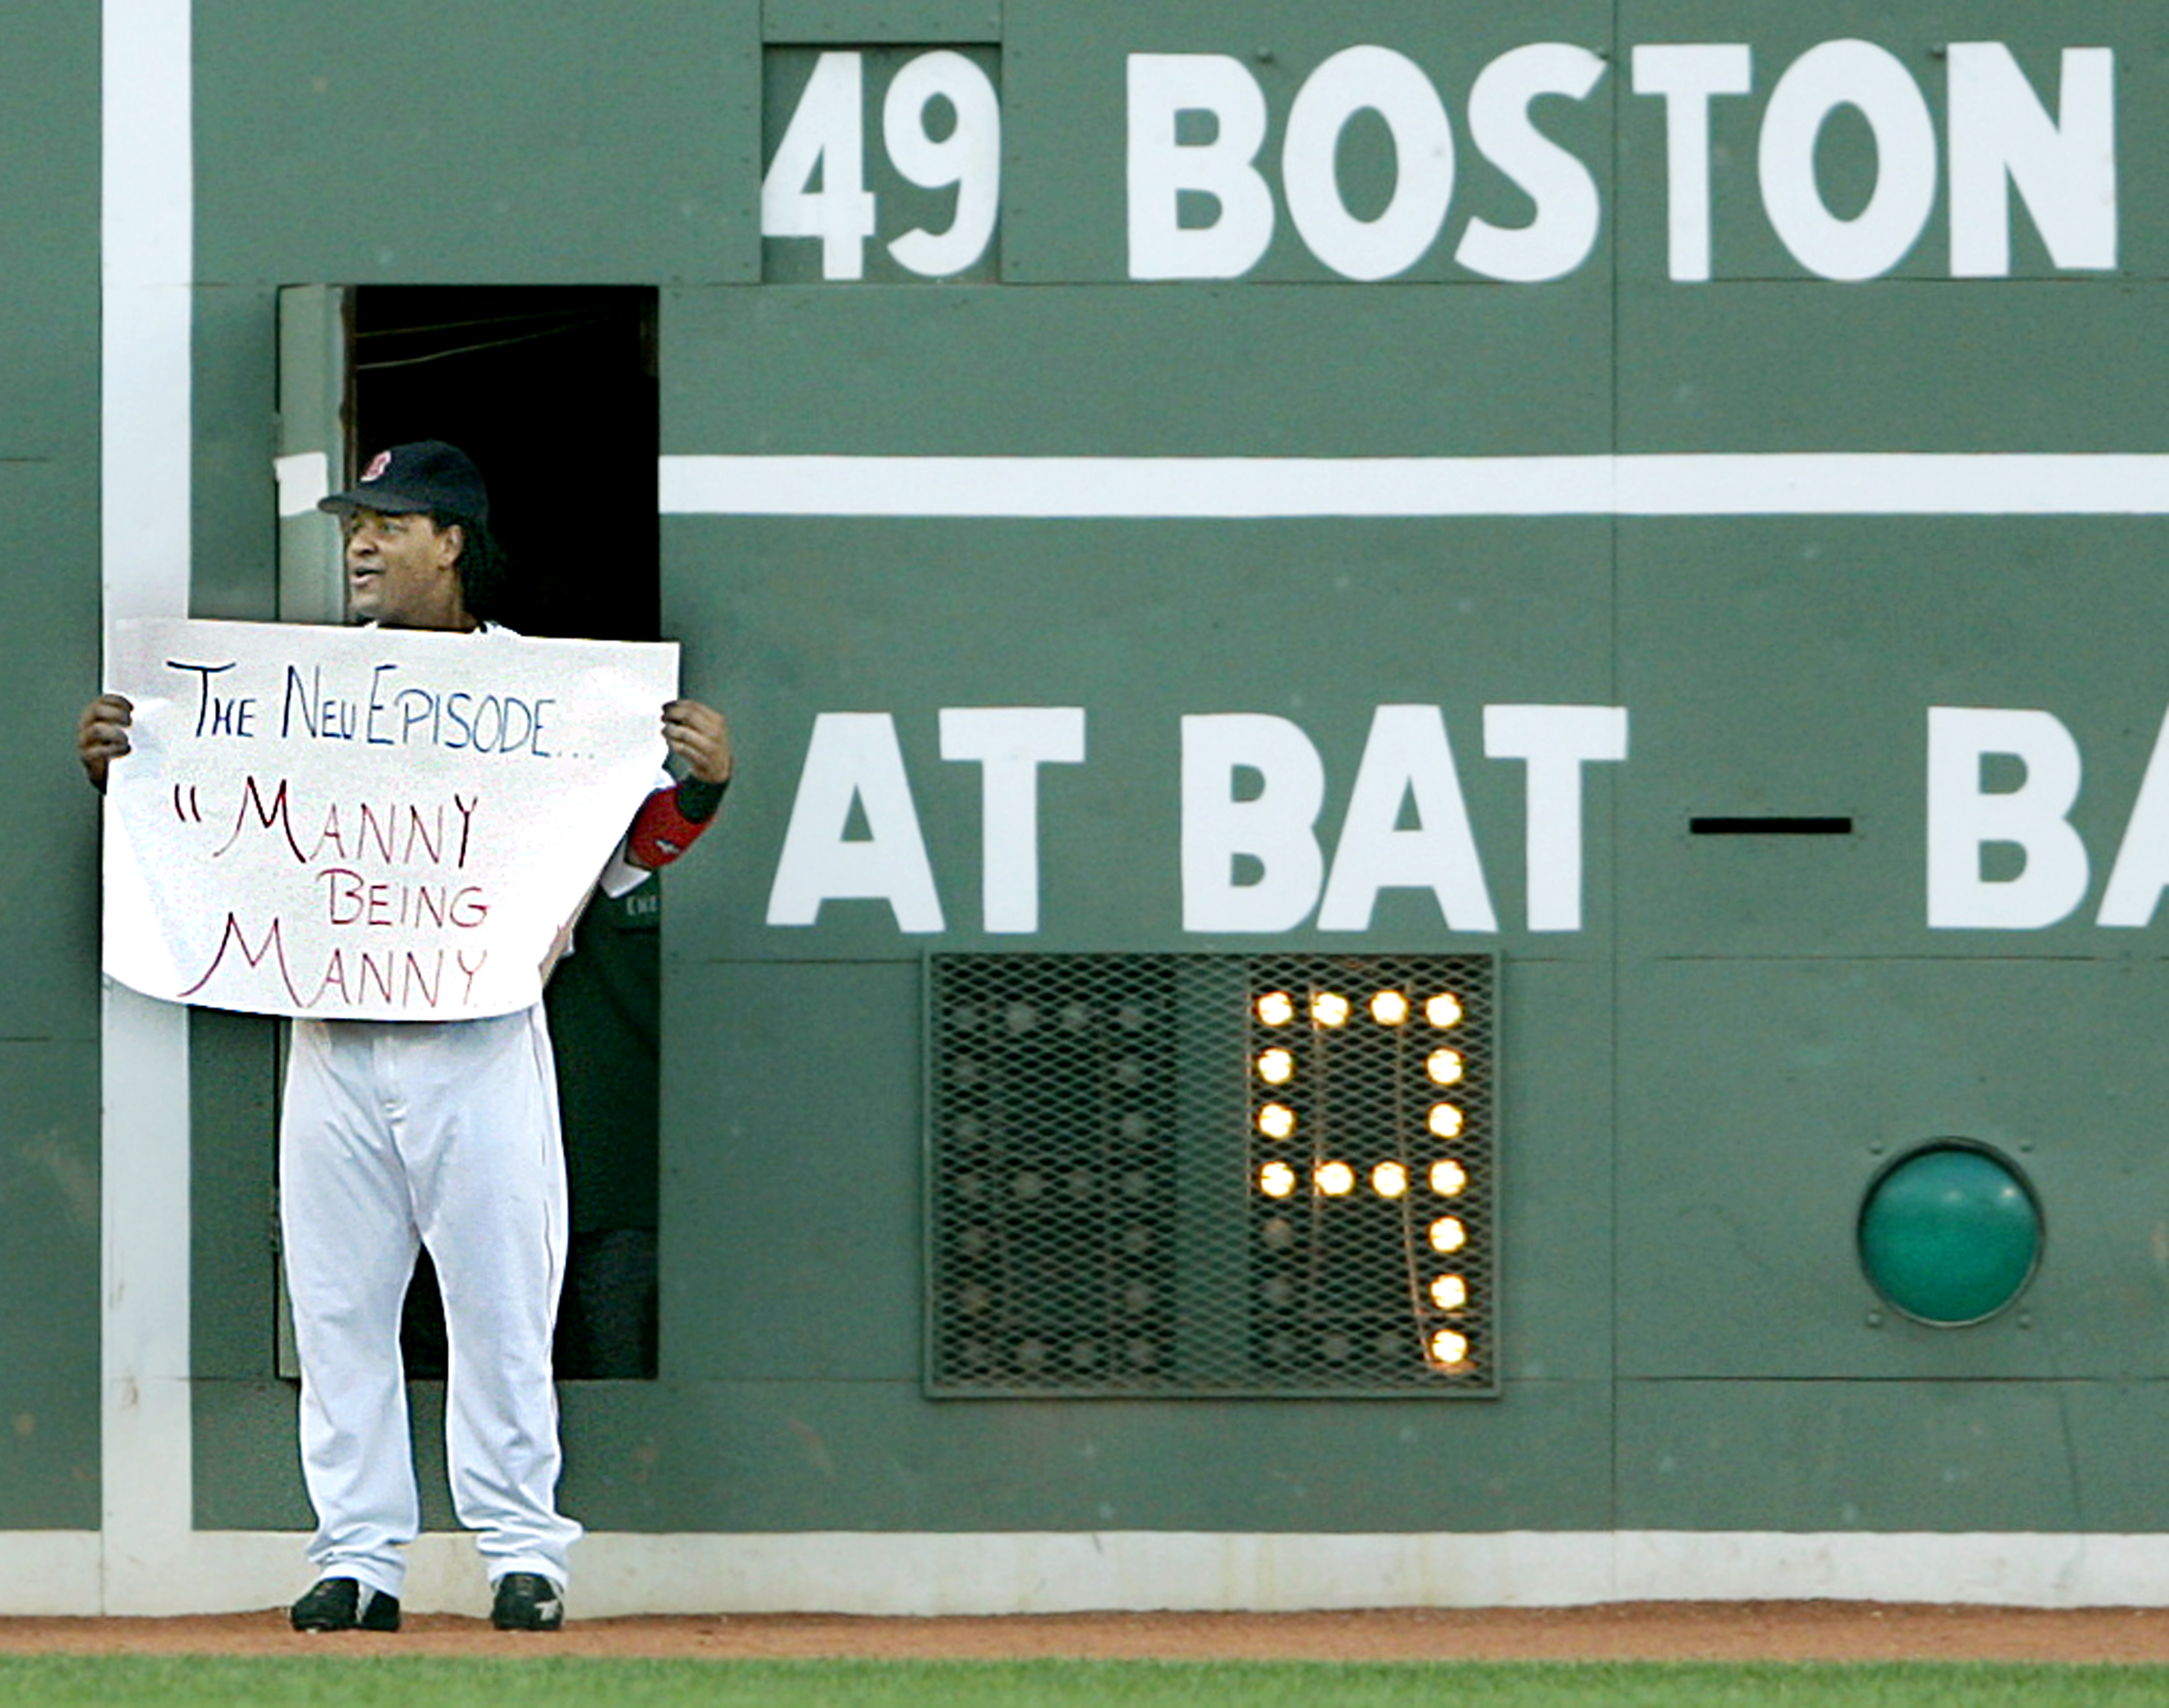 VIDEO: Red Sox Fan Rebuffs Manny Ramirez, Doesn't Recognize Team Icon